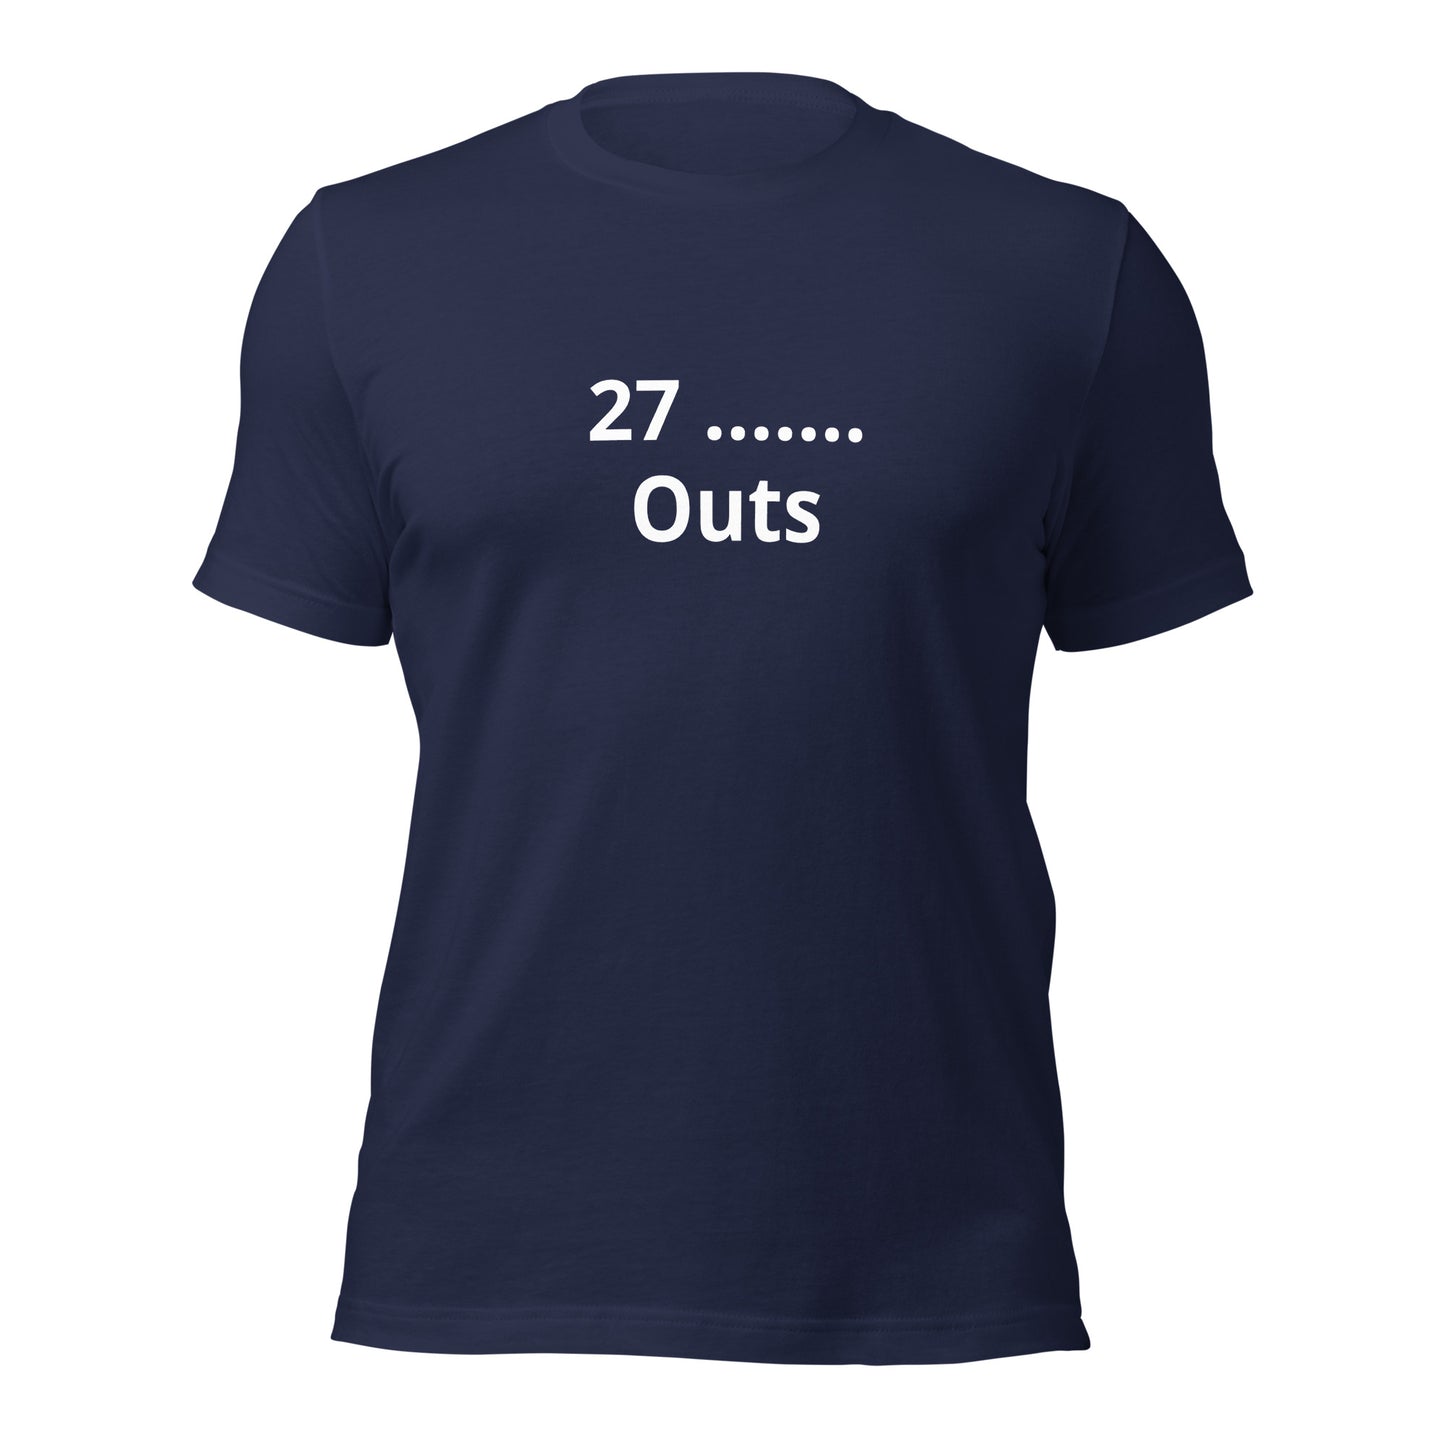 27 Outs!